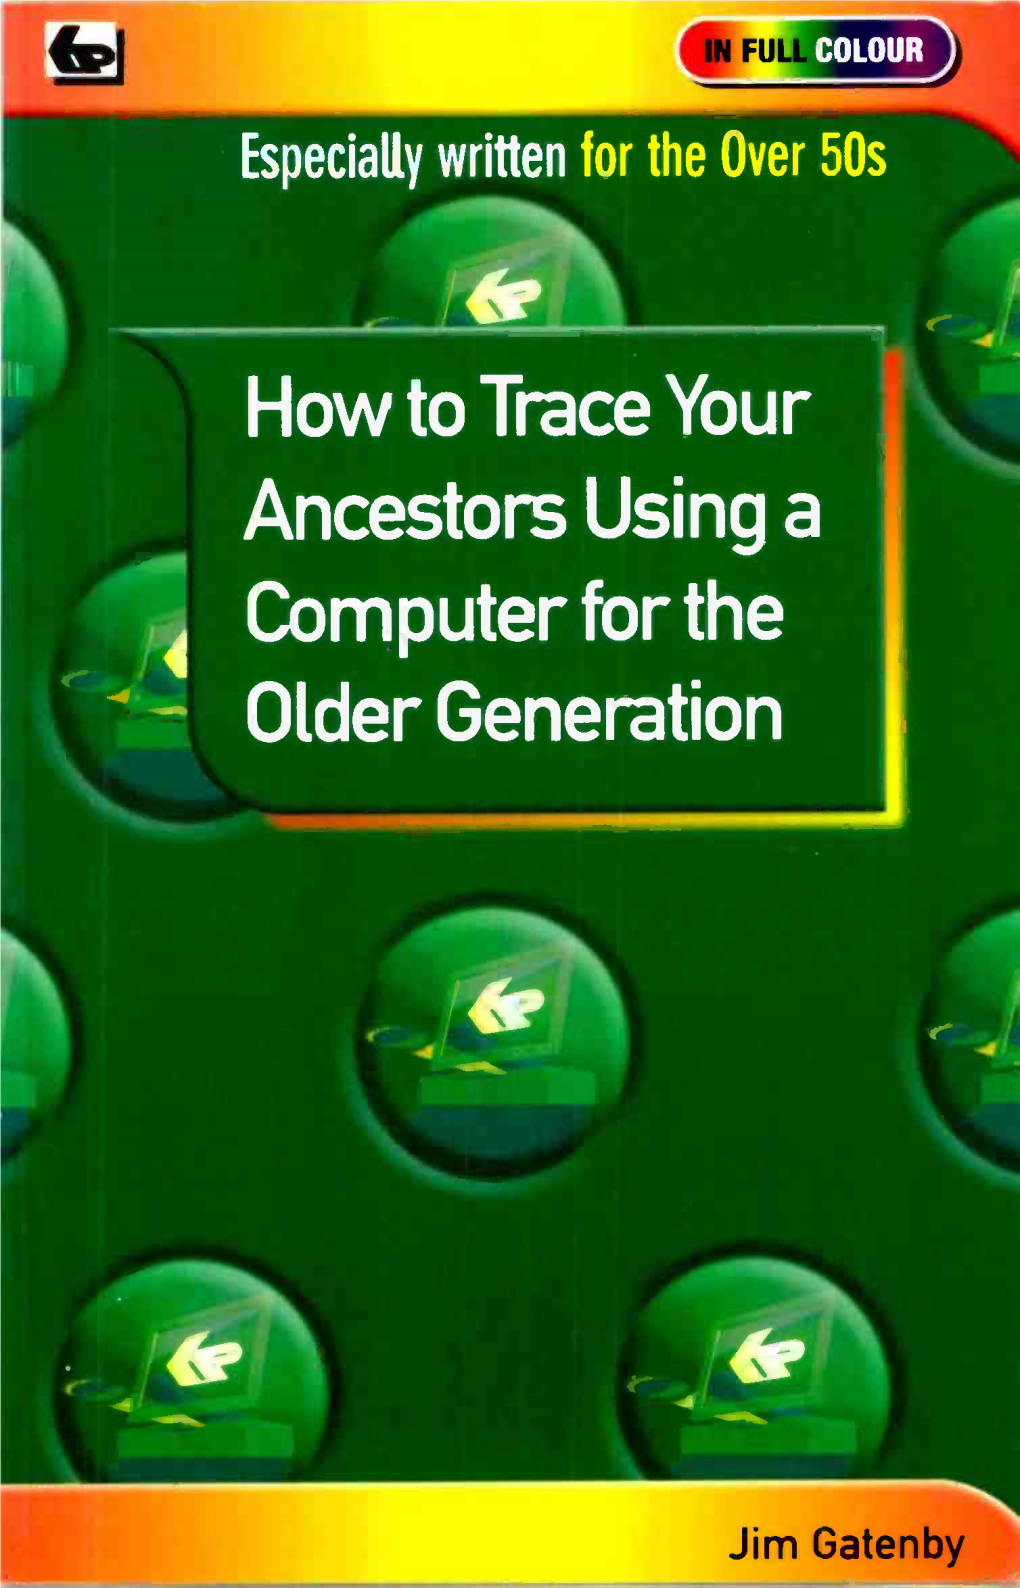 Ancestors Using a Computer for the Older Generation